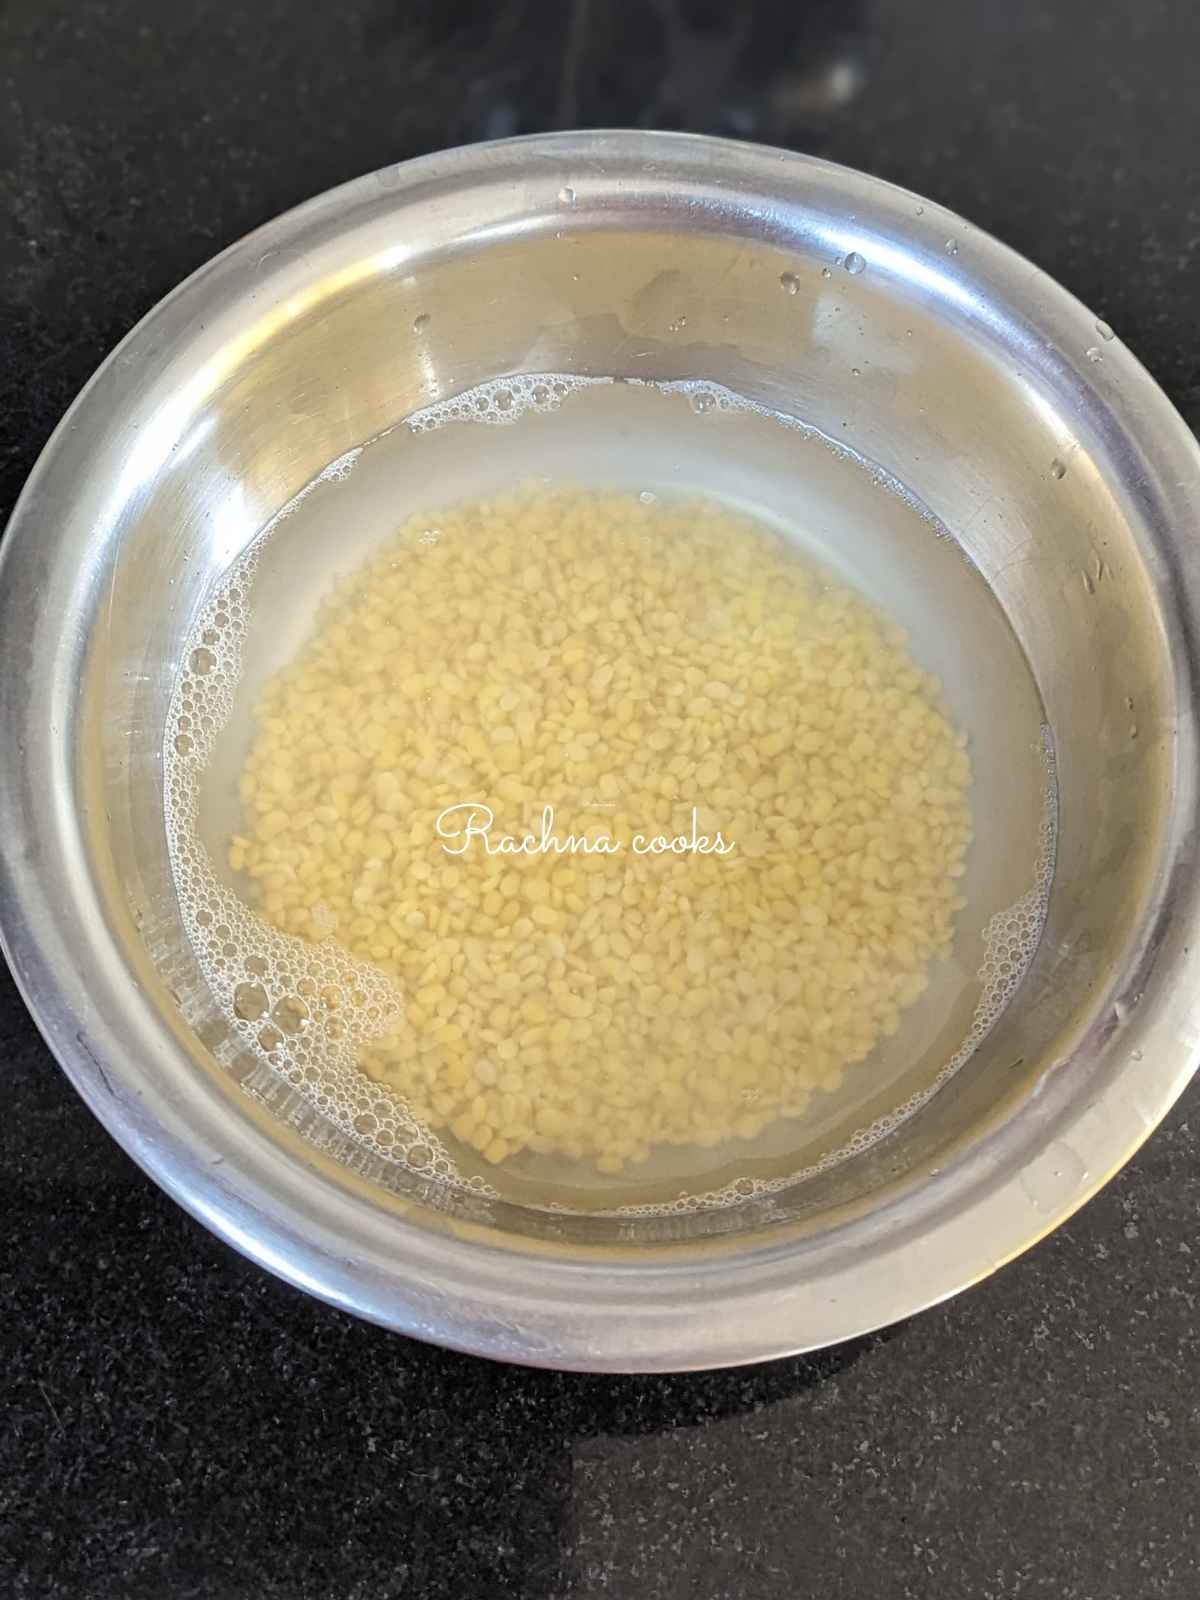 Moong dal soaked in water.